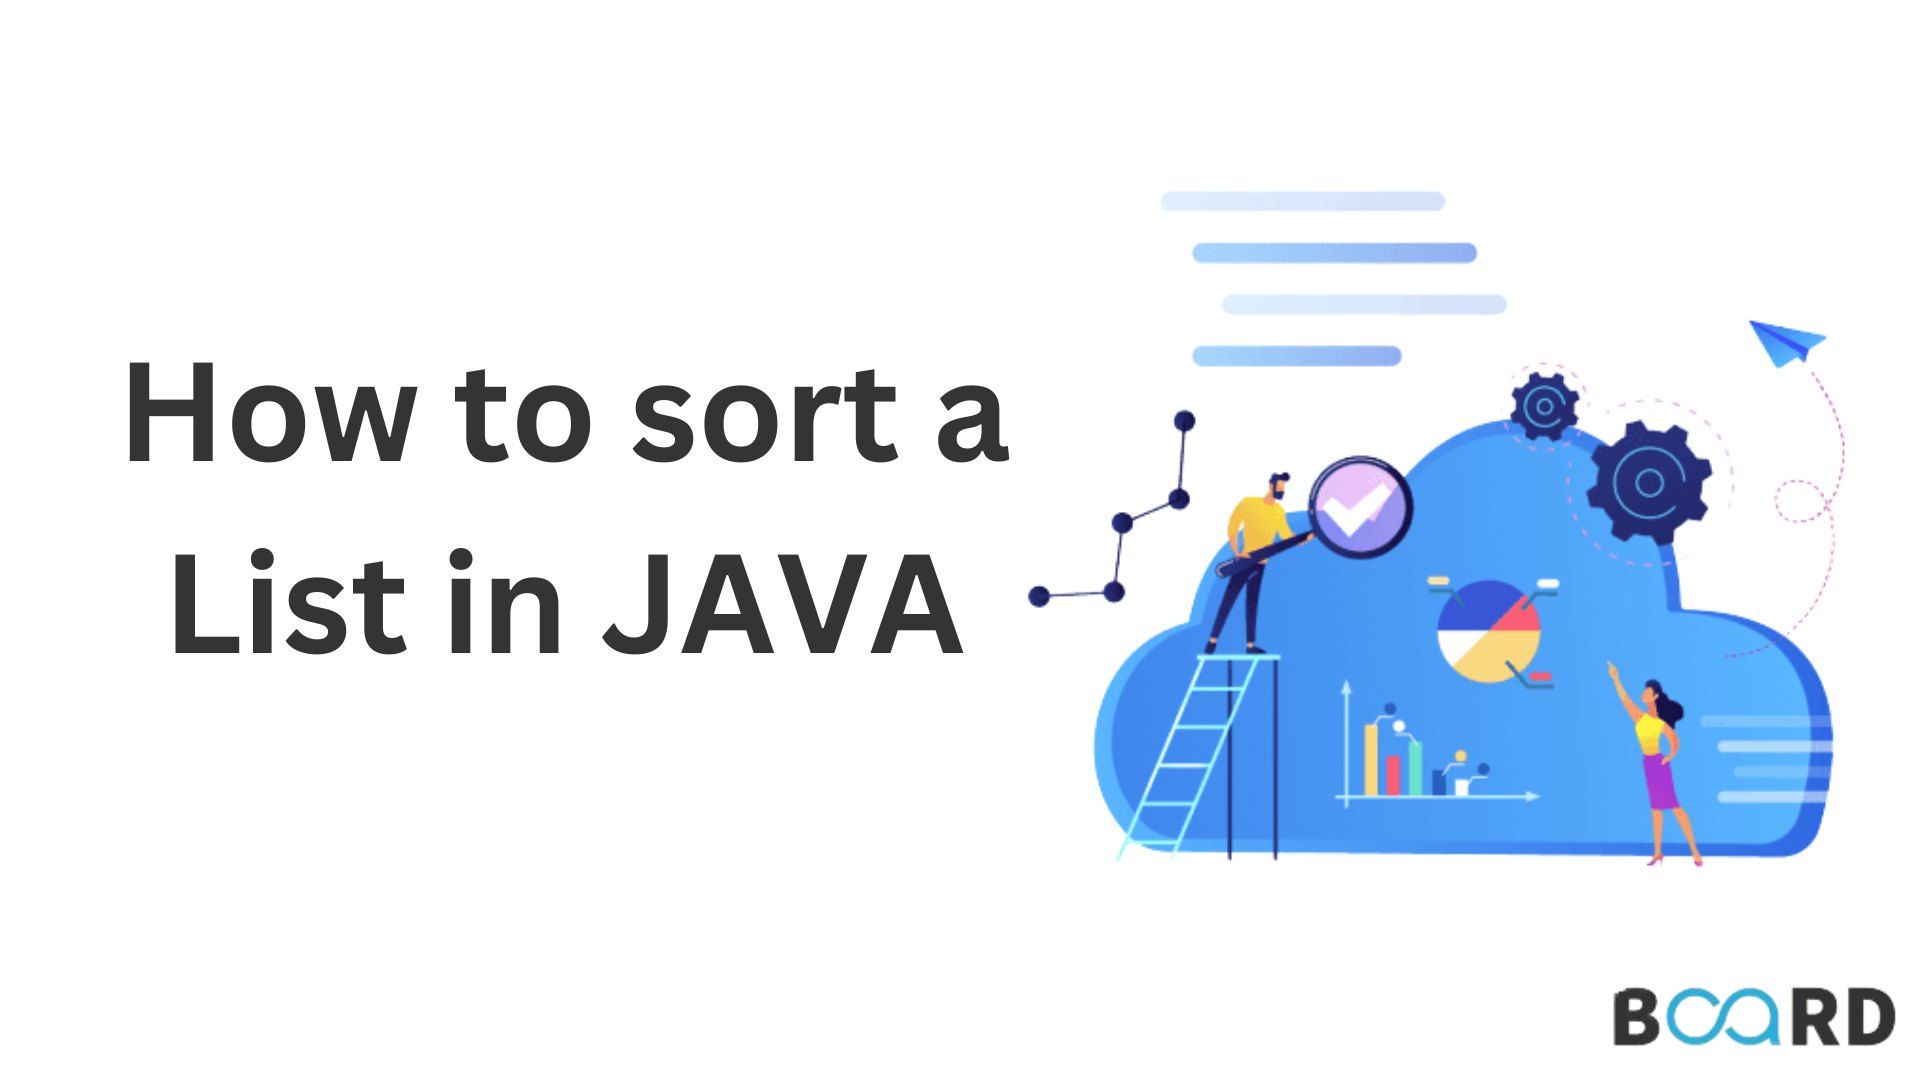 How to sort a list in Java?